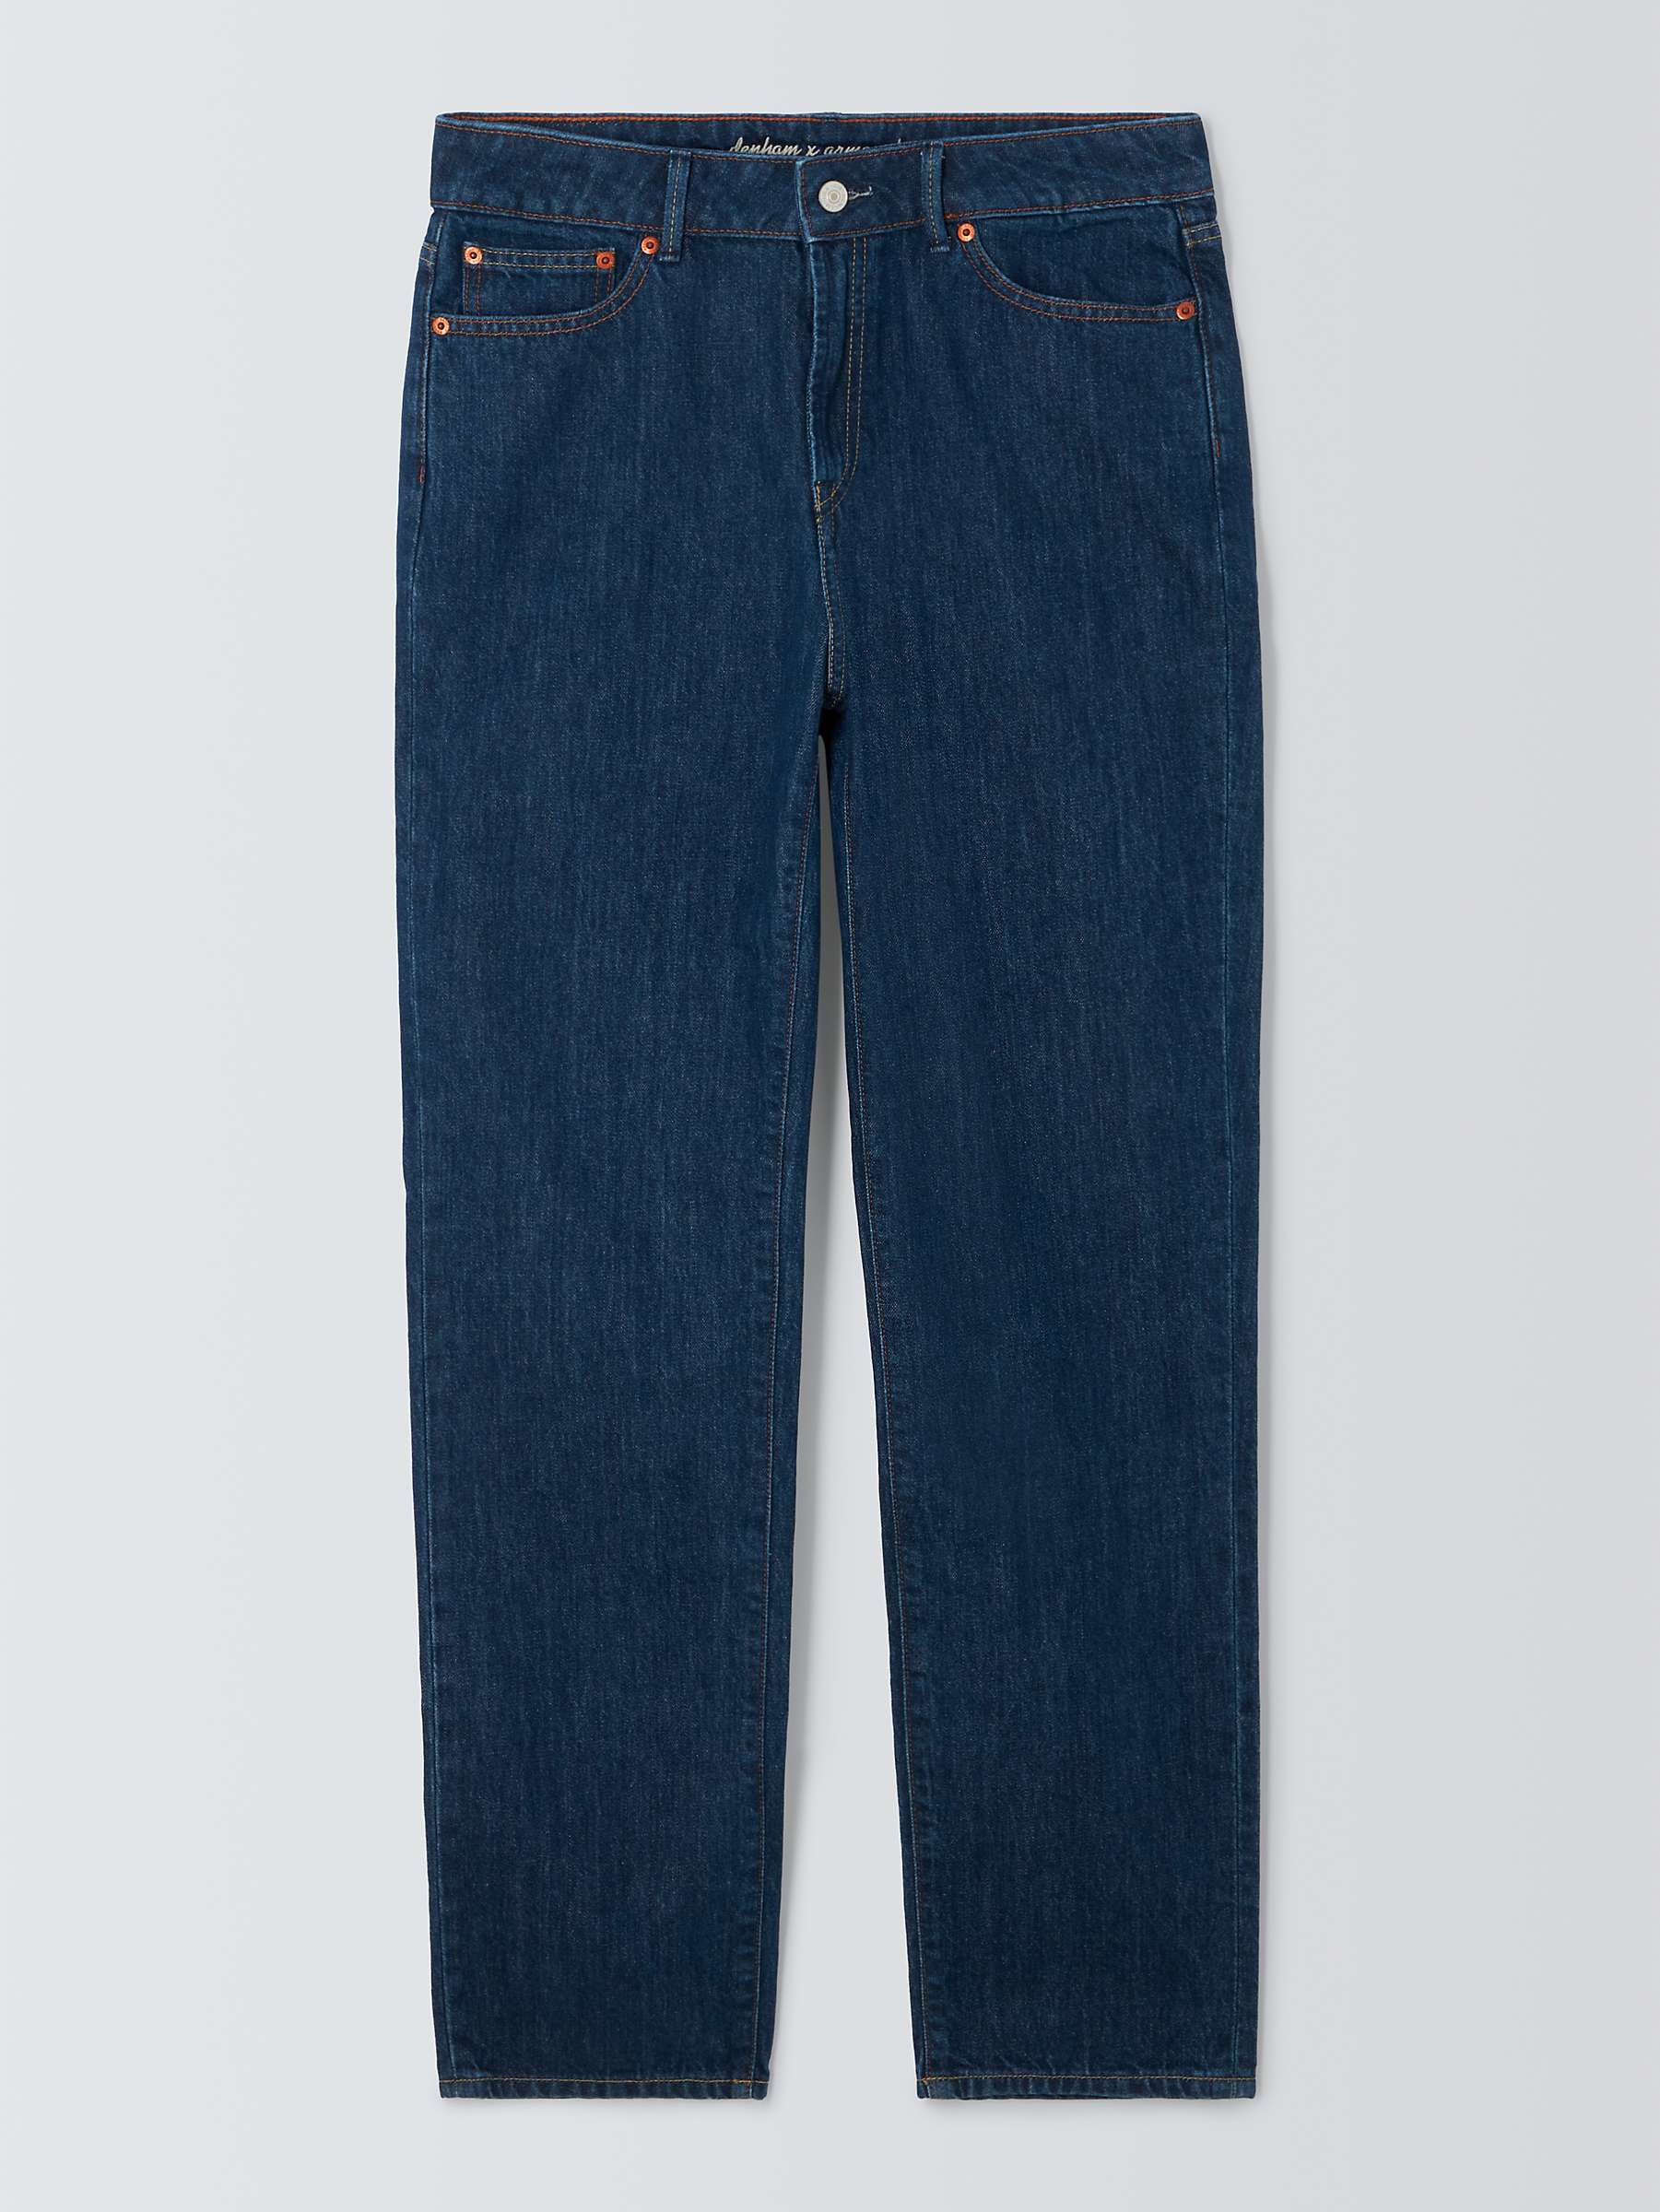 Buy Armor Lux Straight Leg Jeans, Blue Online at johnlewis.com